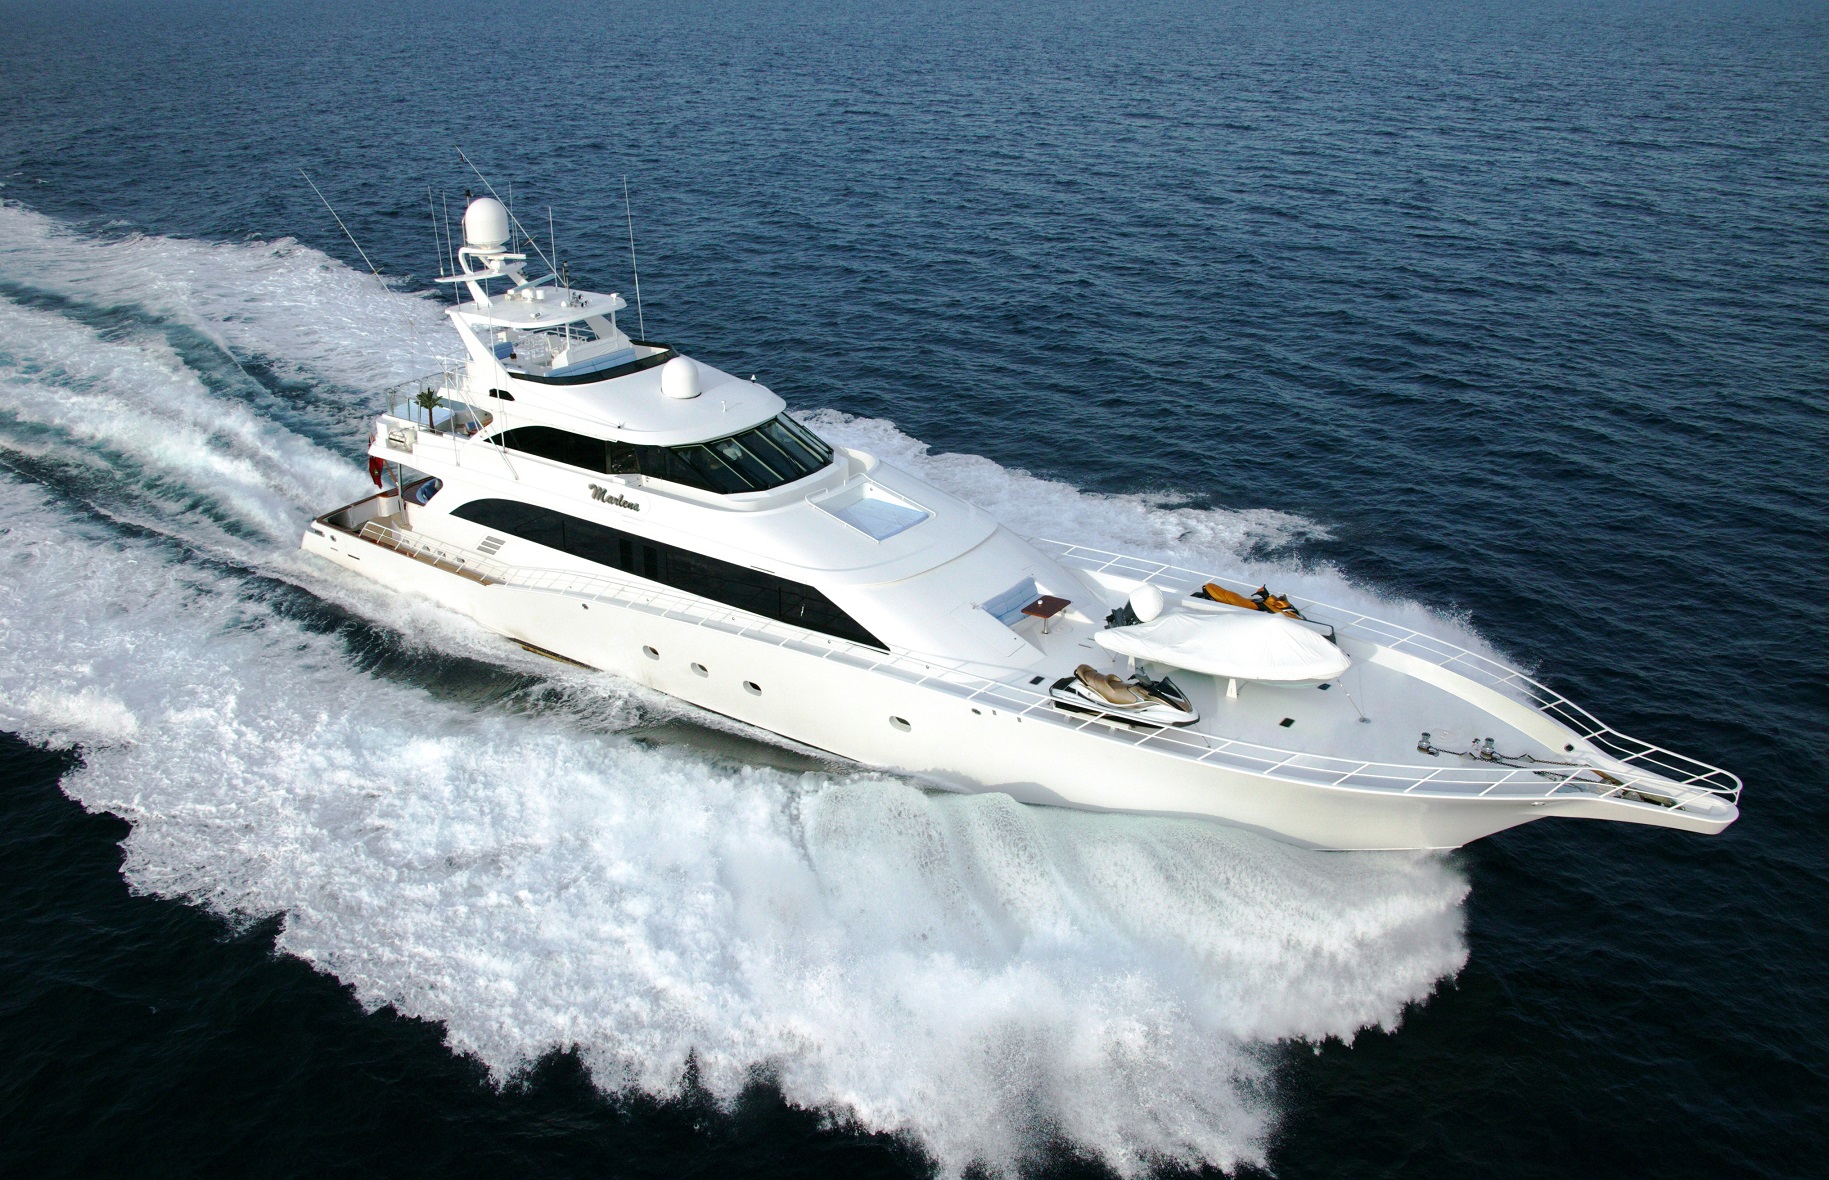 YACHTZOO is delighted to announce the sale of M/Y MARLENA